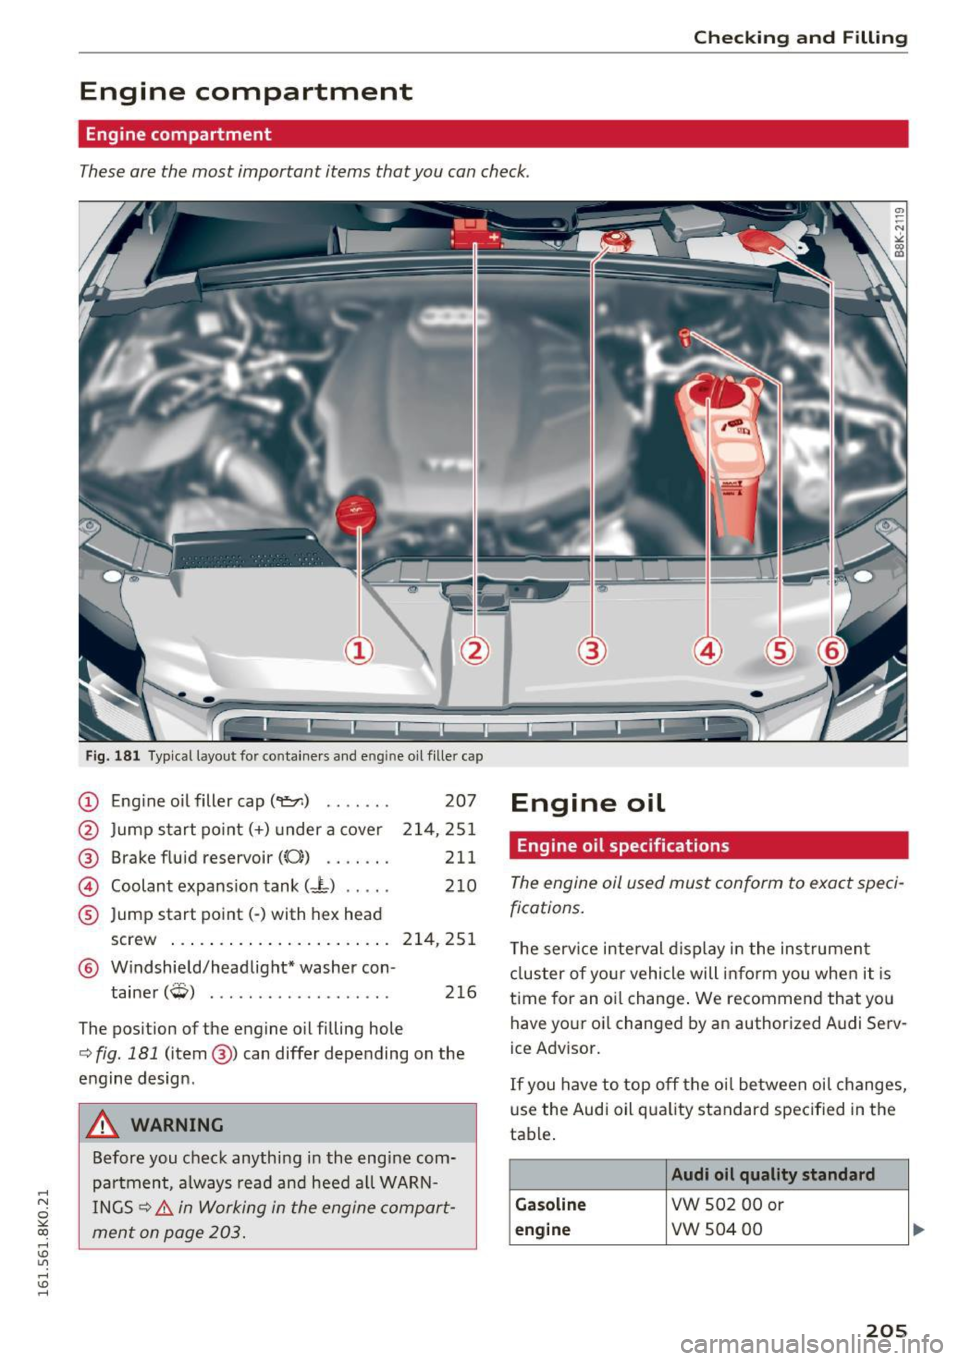 AUDI A4 2016 User Guide ,...., 
N 
0 
"" CX) ,...., 
I.Cl U"I ,...., 
I.Cl ,...., 
Checking  and Filling 
Engine  compartment 
Engine  compartment 
These are the  most  important  items  that you  can check. 
Fig. 181 Typic